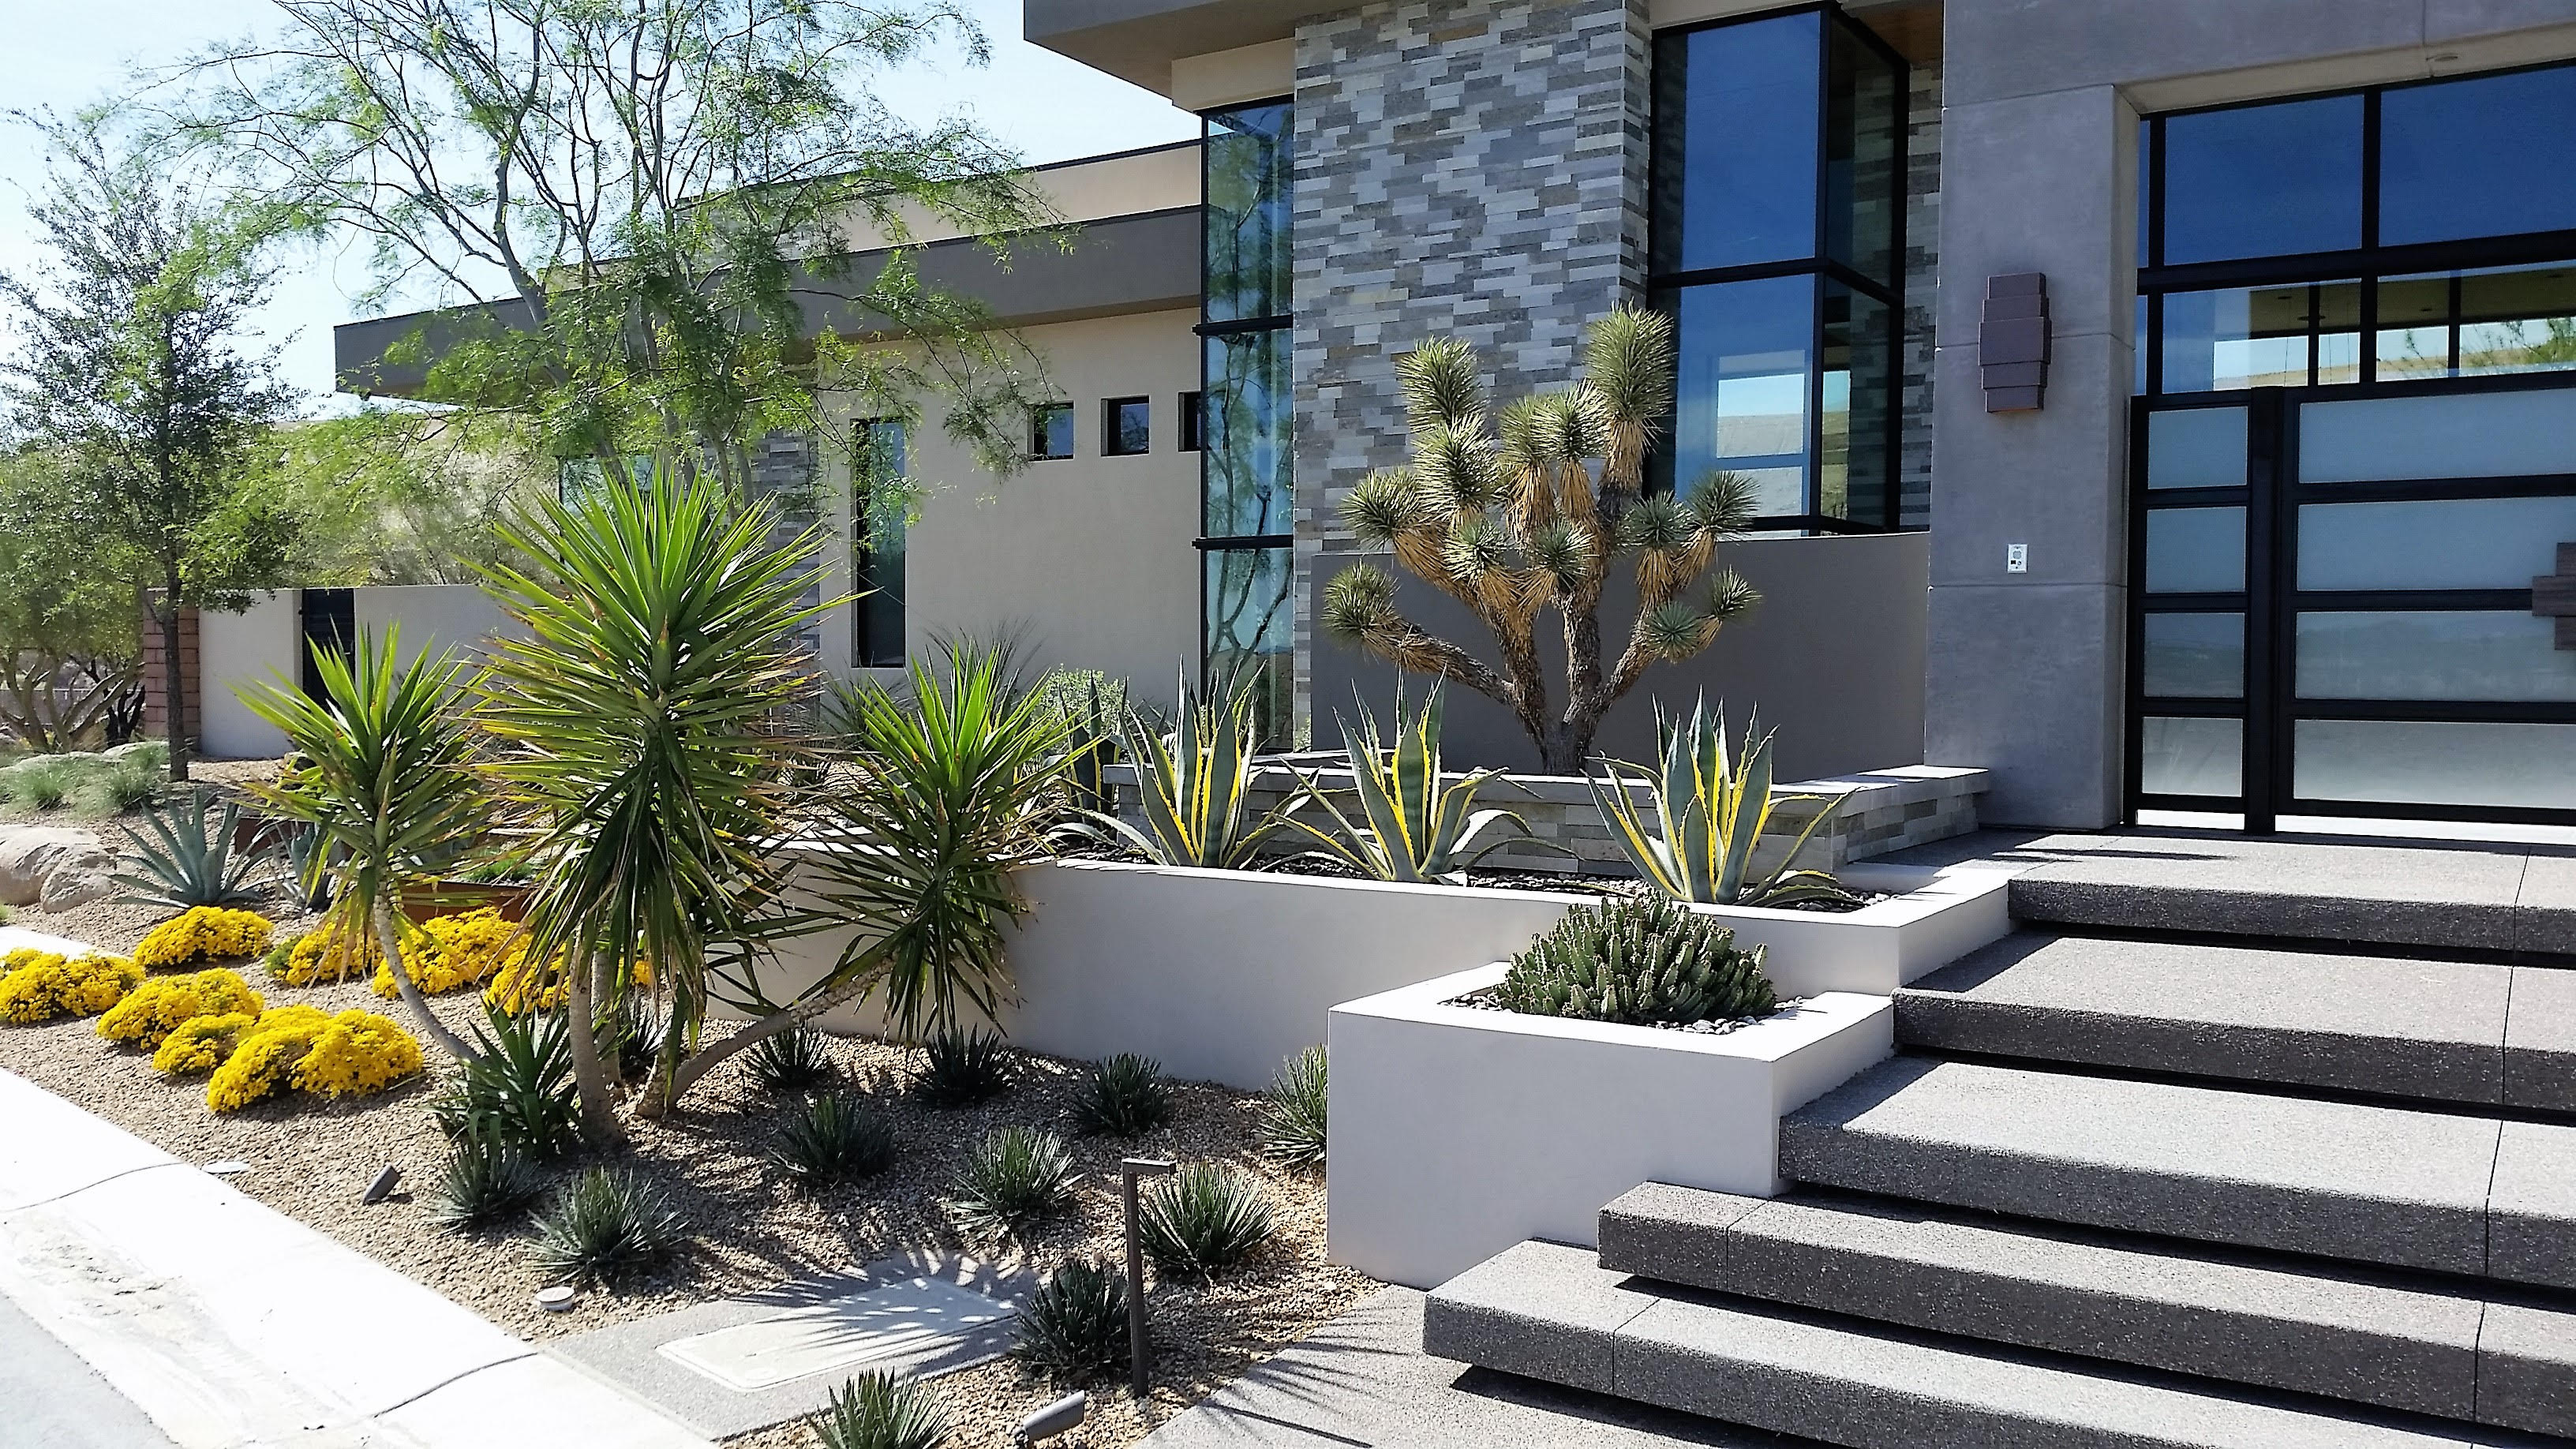 Landscape Architectural Services & Designs By Creative Las Vegas Landscape Architect Jonathan Spears, a licensed landscape architect in Nevada and California.